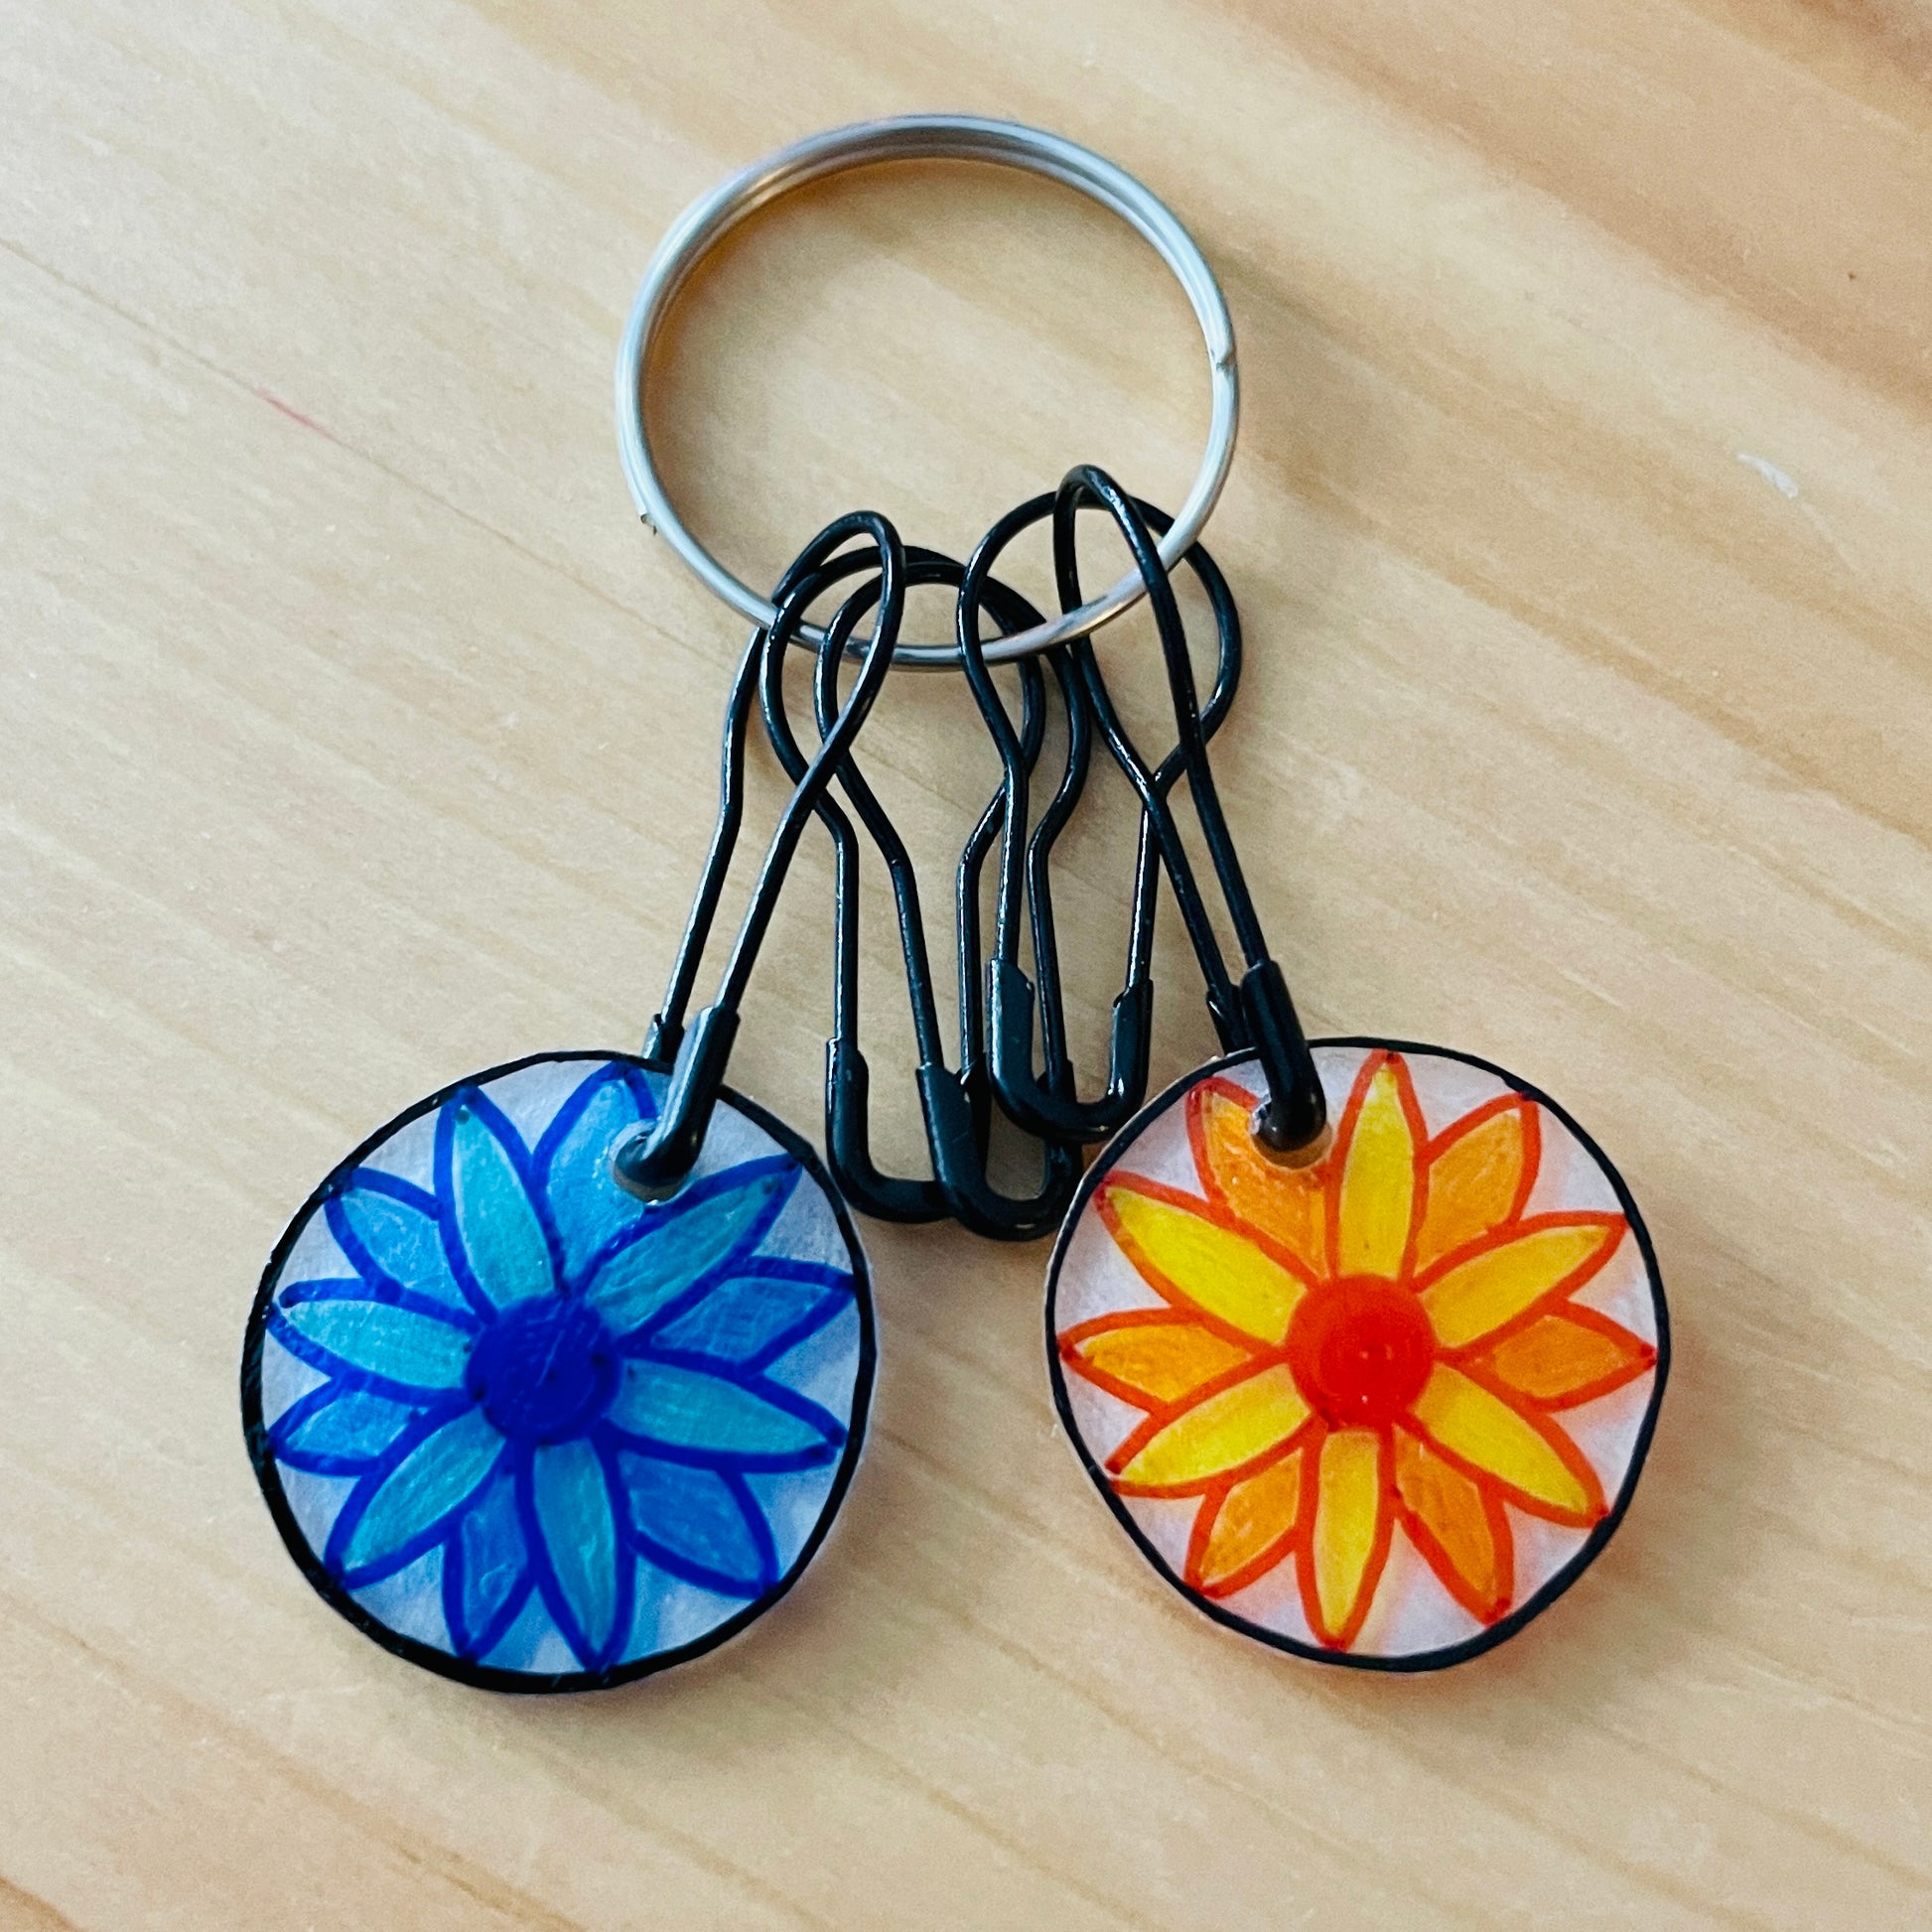 Stitch Markers with Daisy Flower Charms - ILoveMyBlanket